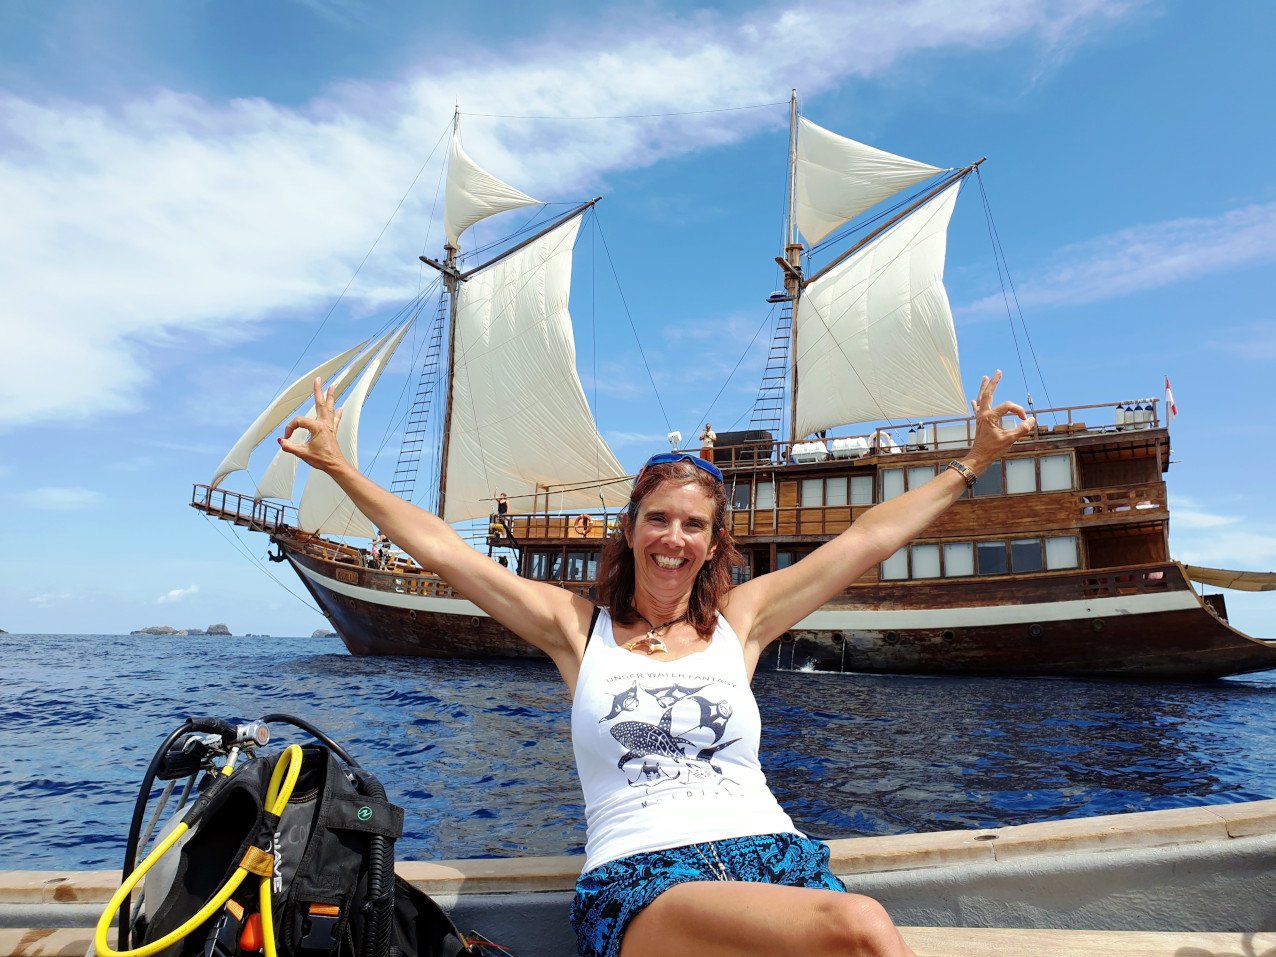 (English) Papua Explorers Guest Gabby sitting on the tender with Coralia Liveaboard in the background